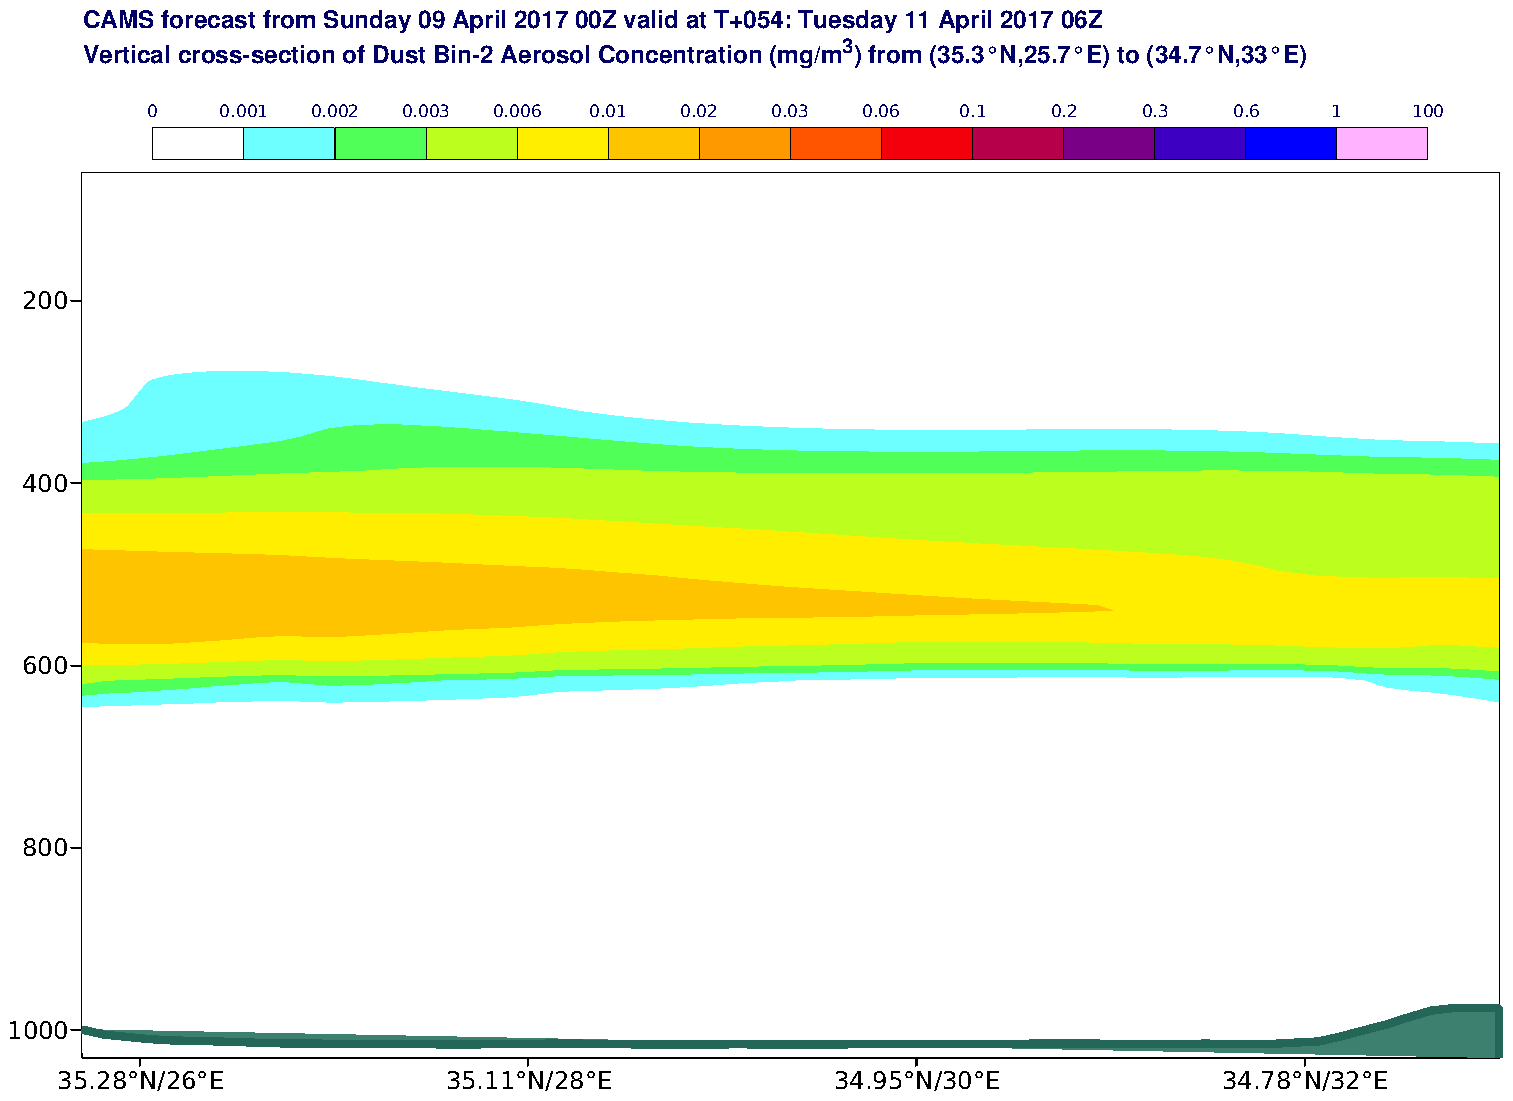 Vertical cross-section of Dust Bin-2 Aerosol Concentration (mg/m3) valid at T54 - 2017-04-11 06:00